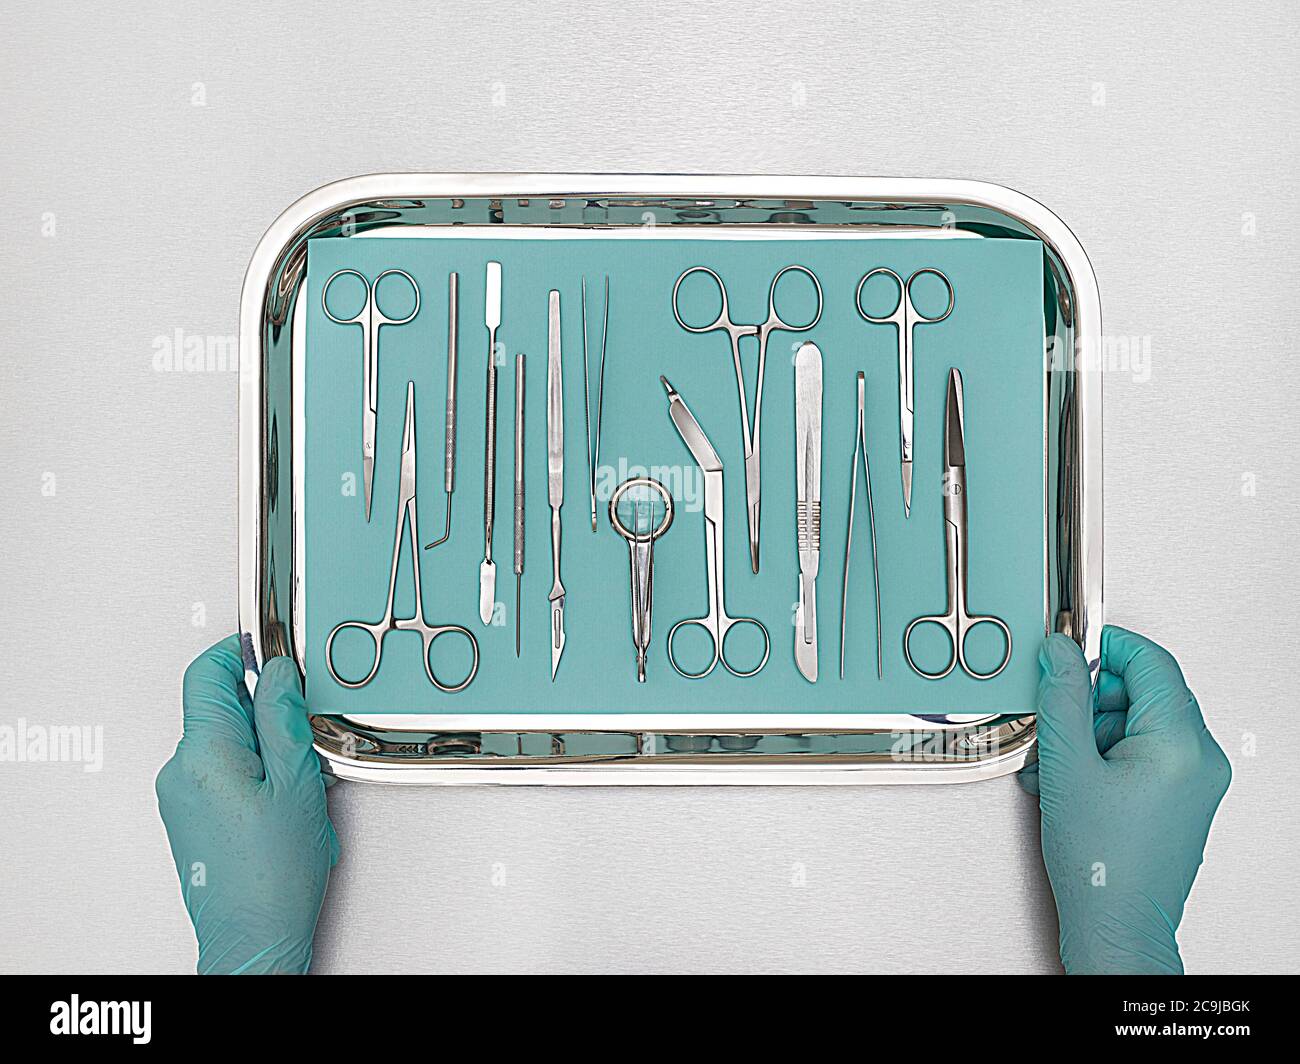 Person holding tray with surgical equipment against a white background. Stock Photo